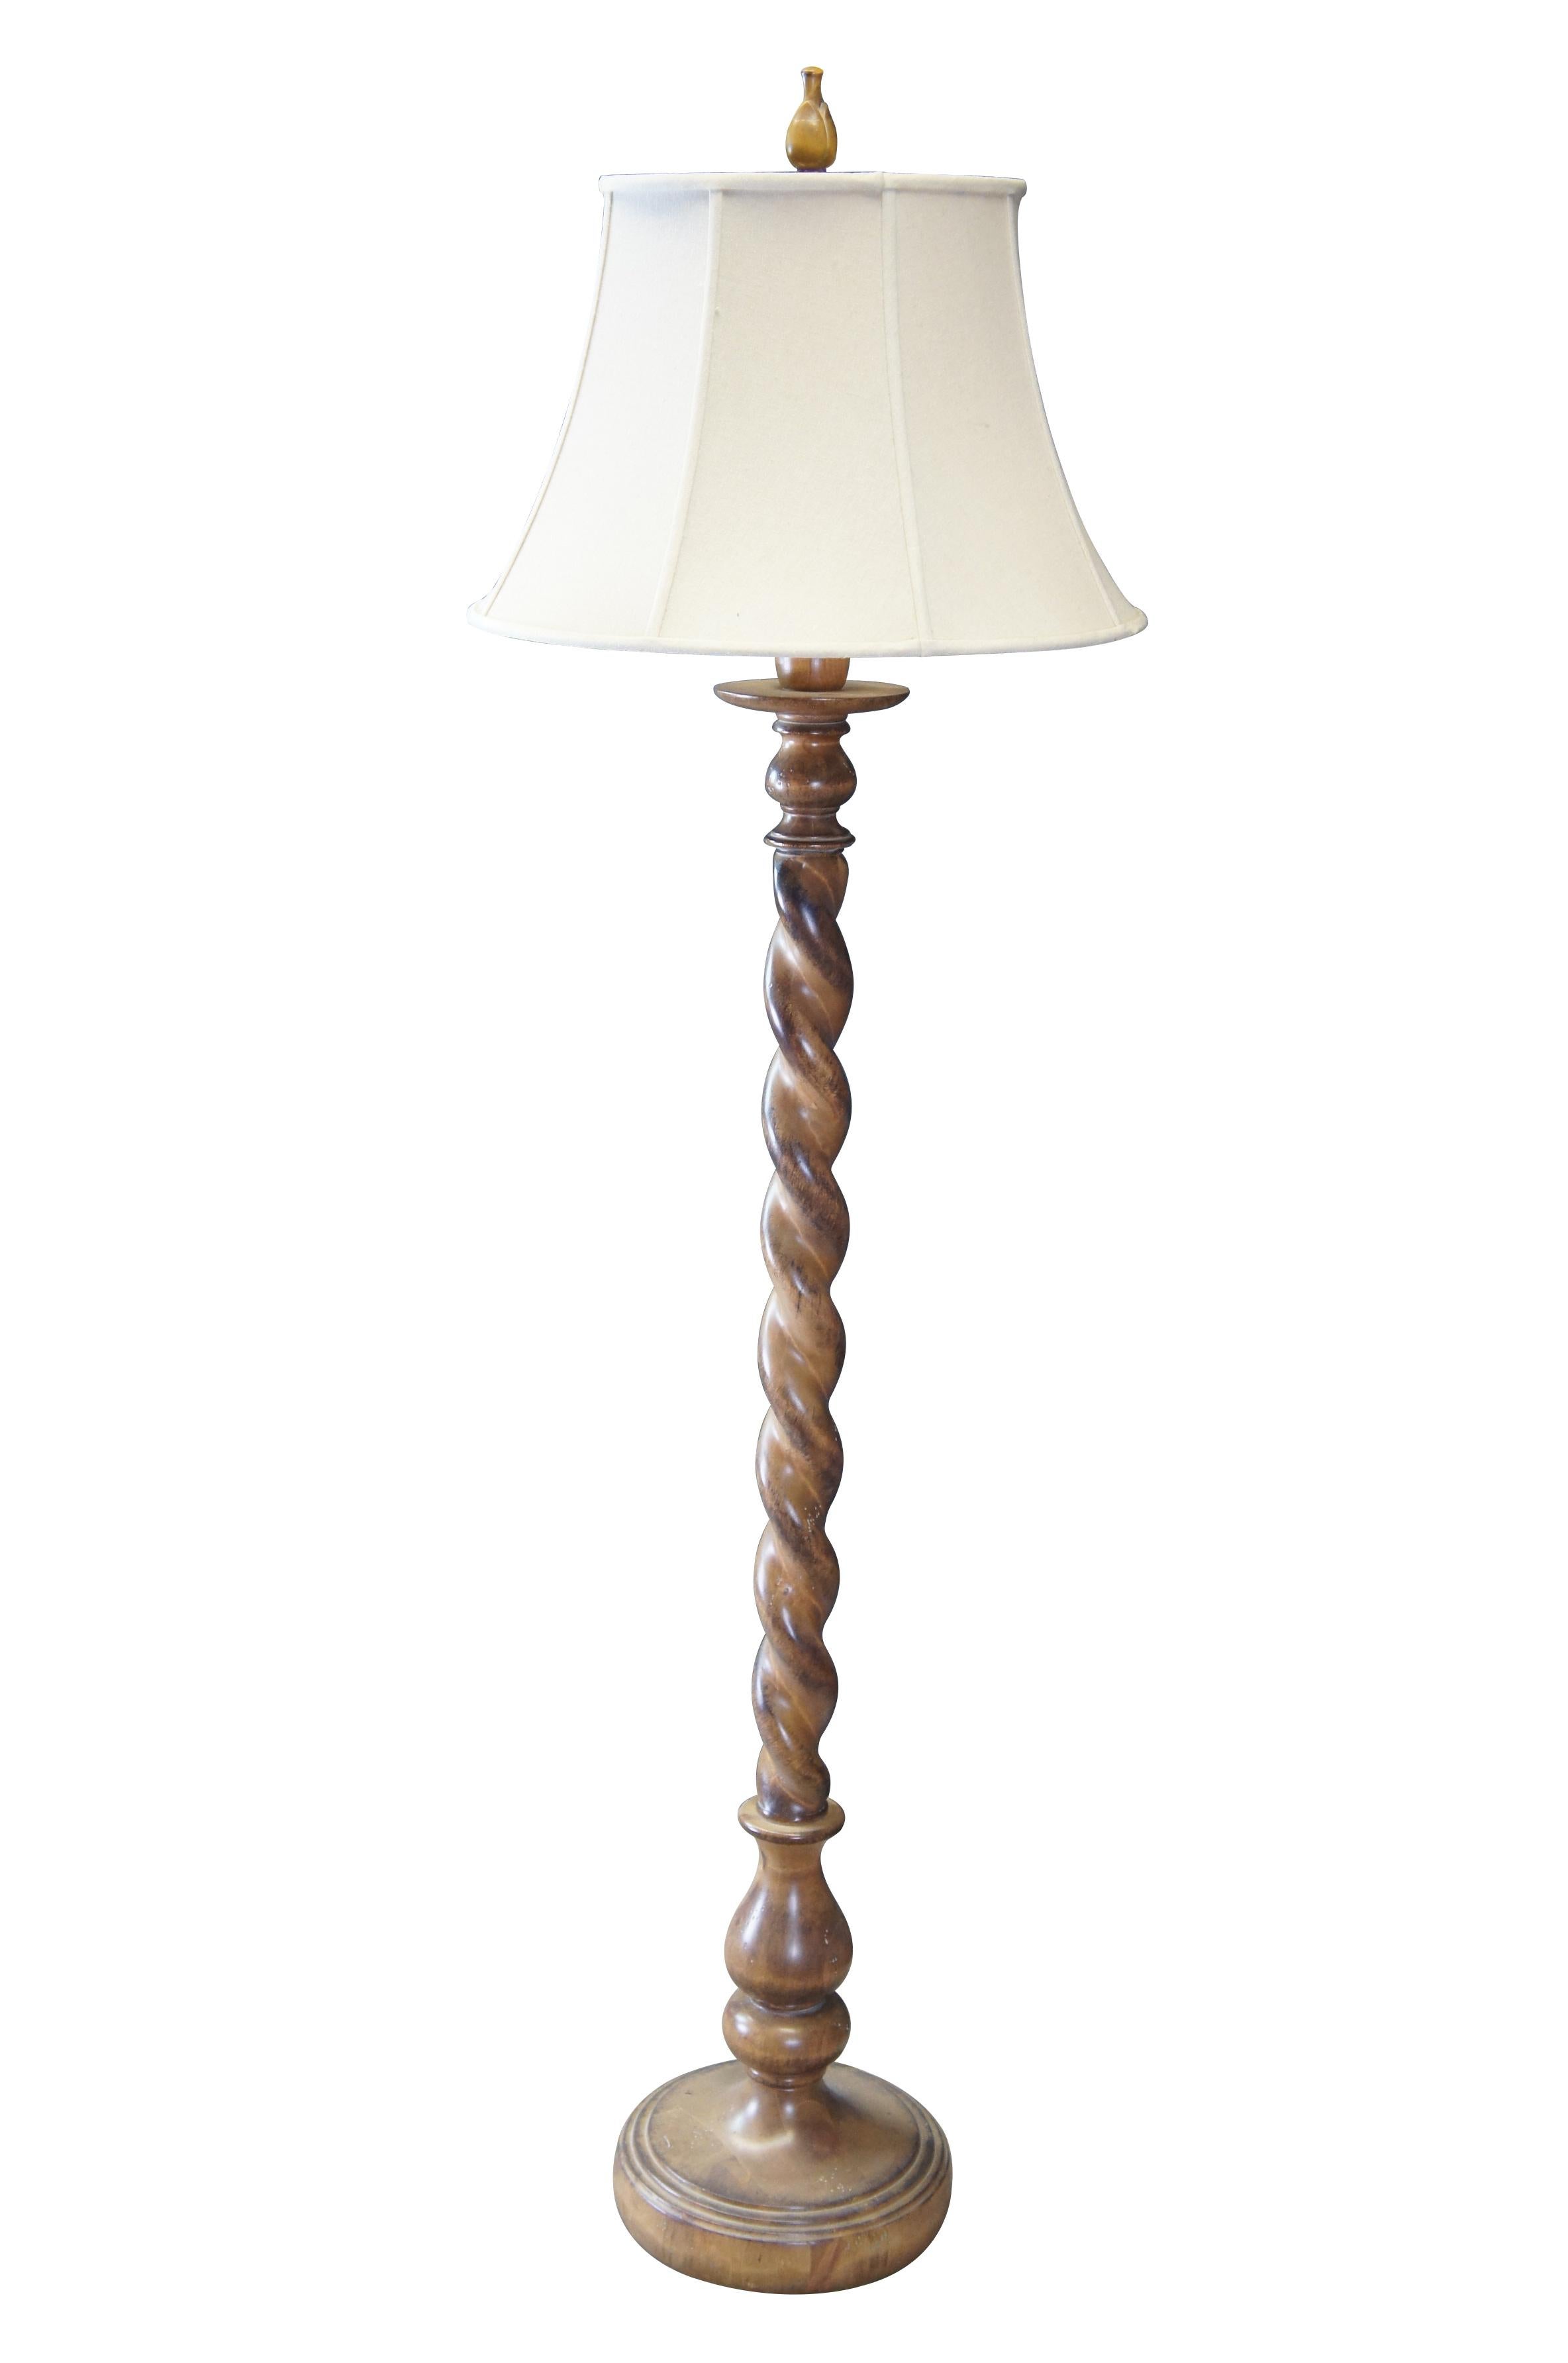 Handmade Italian Barley Twist Floor Lamp. Naturally distressed with candlestick design, tapered shade and tulip finial. 

Dimensions:
20